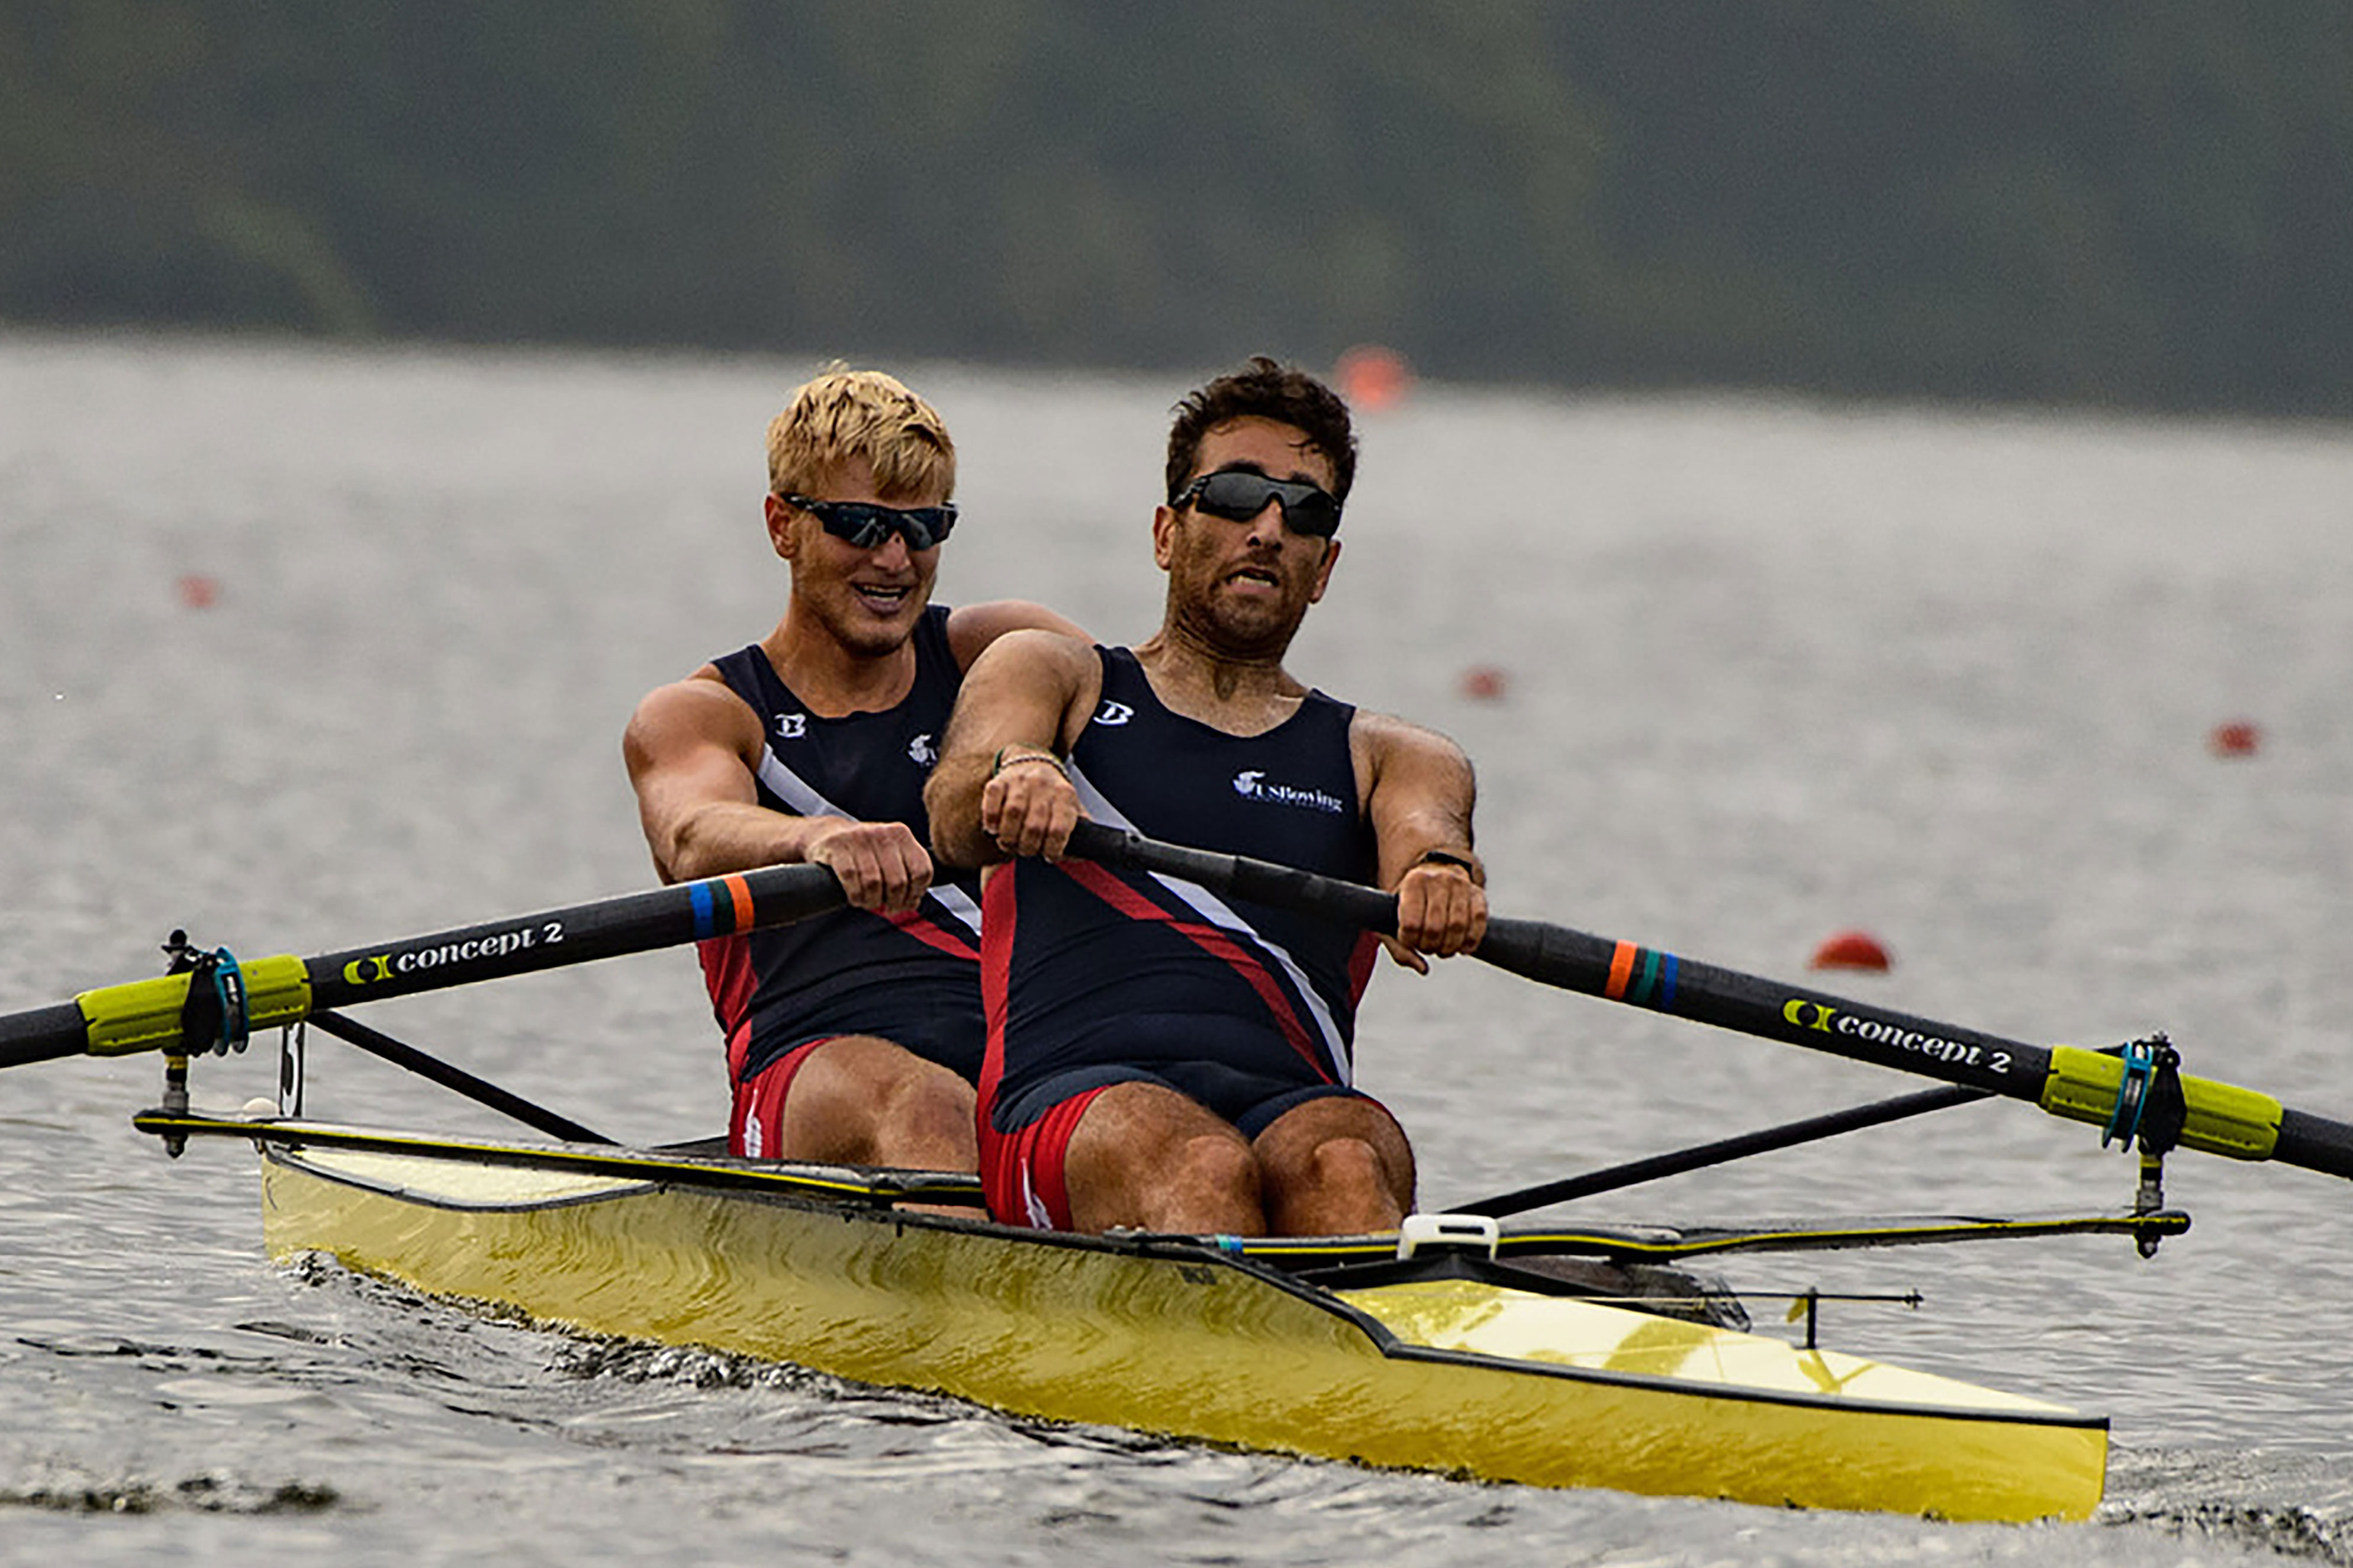 Anders Weiss (left) and Nareg Guregian (right) compete at the U.S. Olympic trials for pairs rowing at Princeton on June 22, 2016.